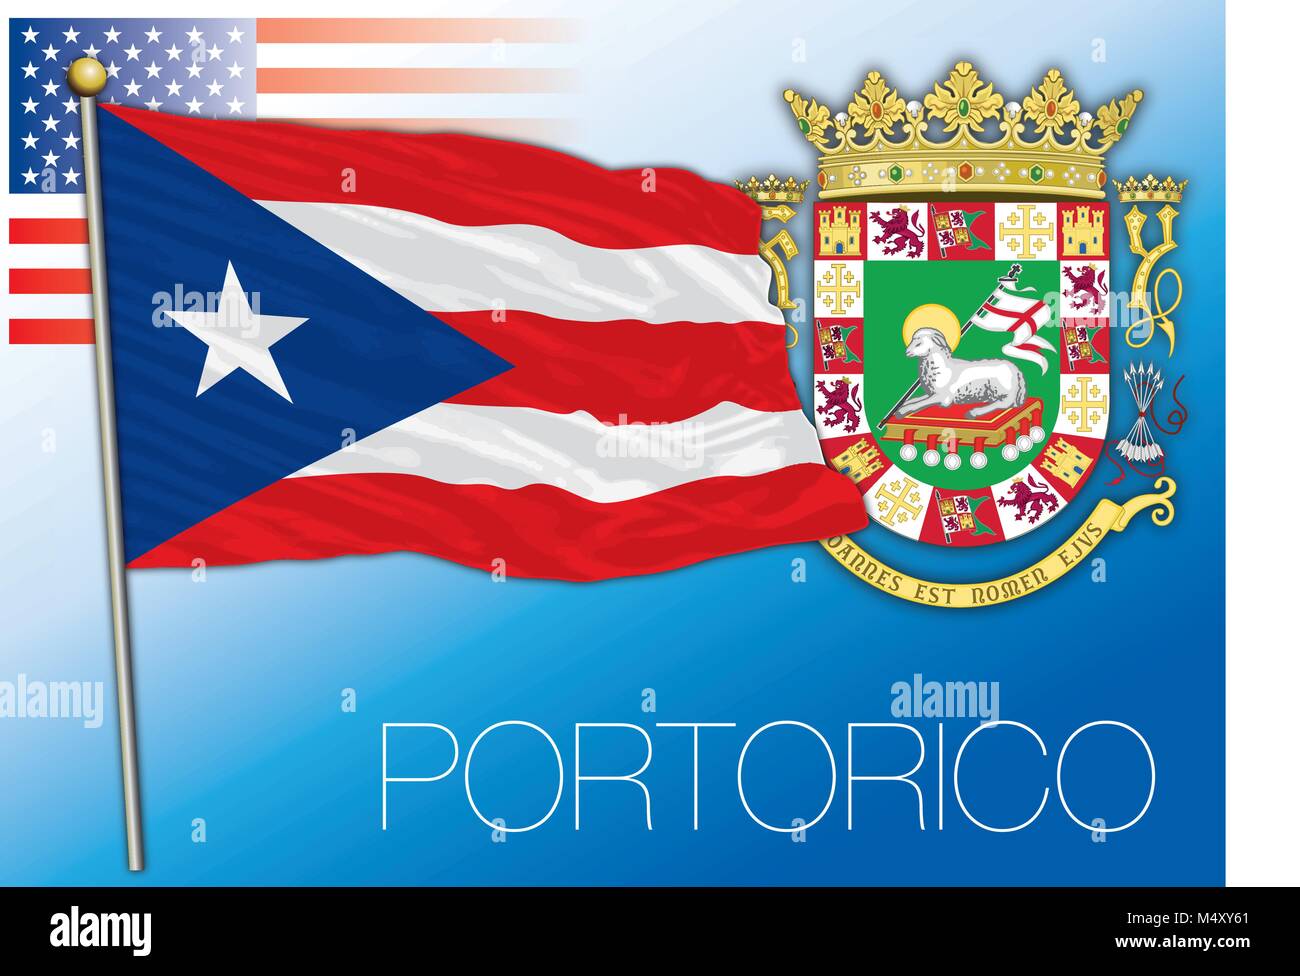 Portorico federal state flag, United States Stock Vector